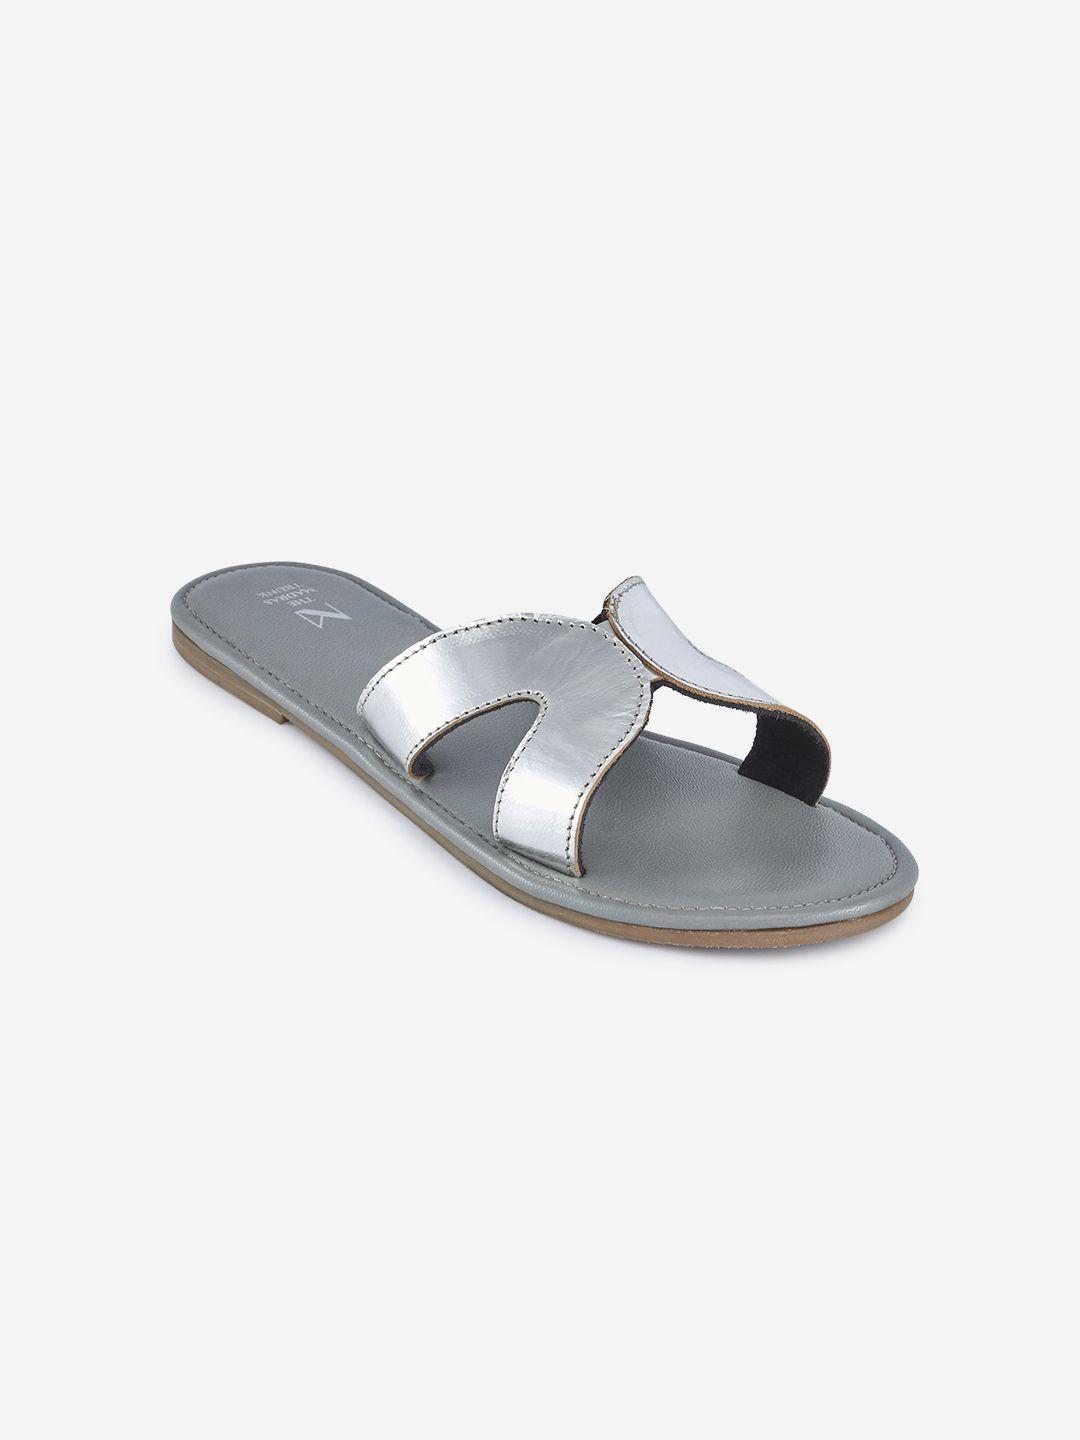 the madras trunk women silver-toned embellished leather open toe flats